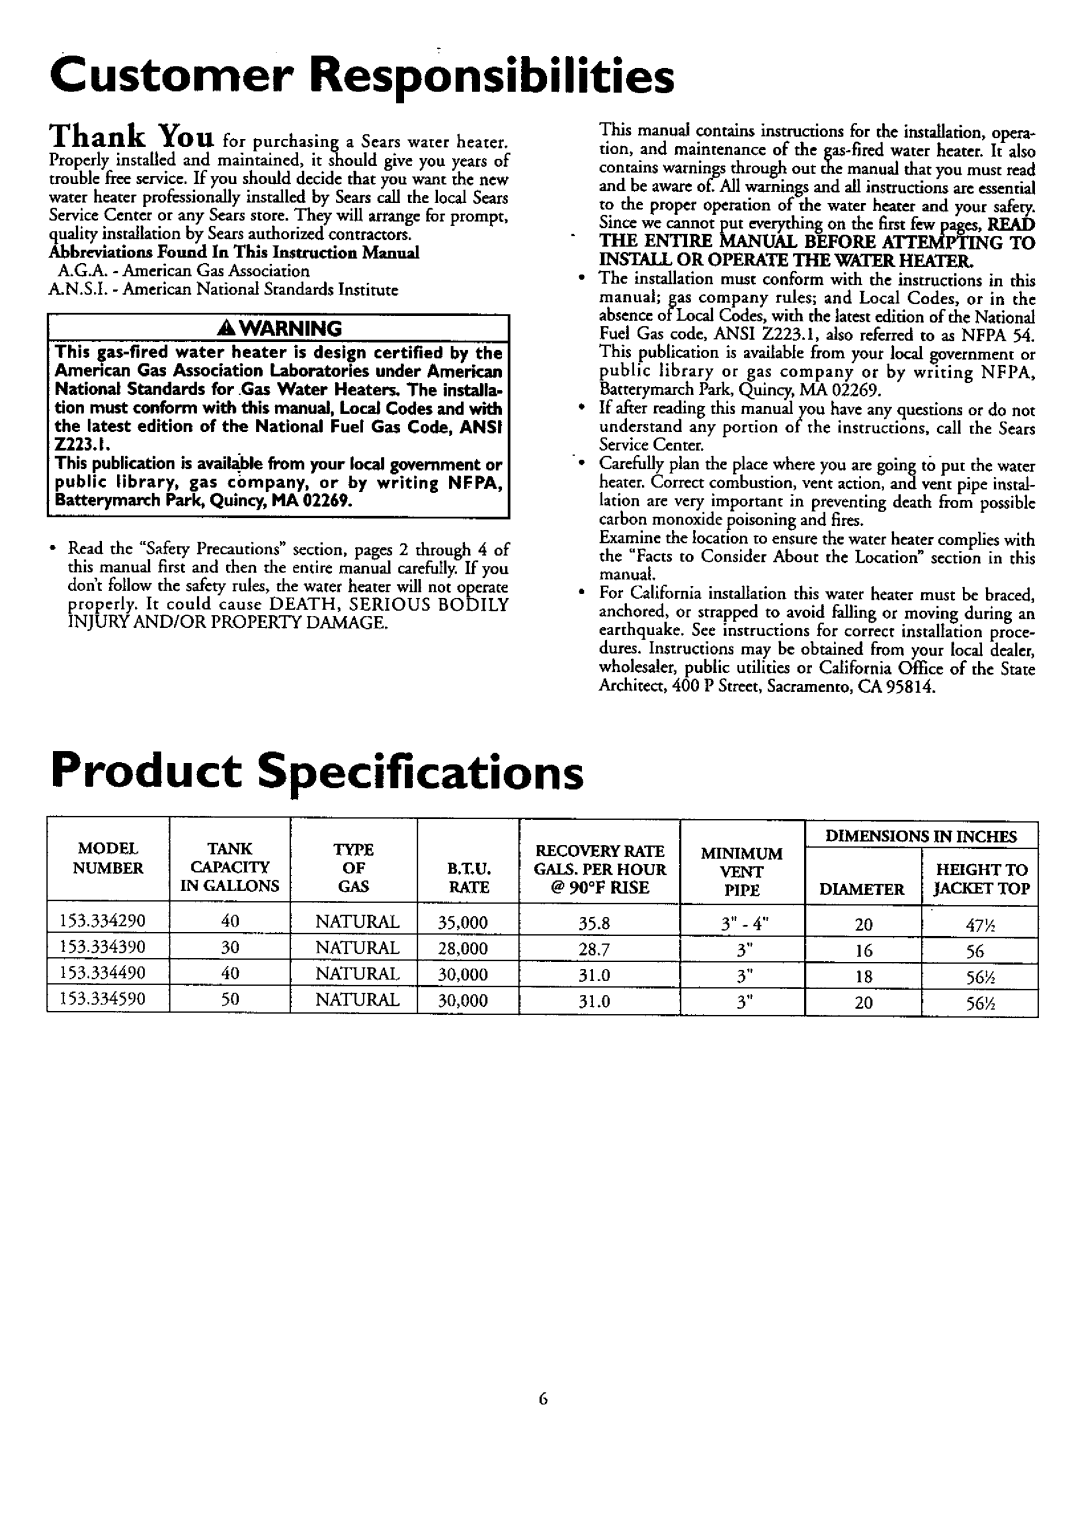 Kenmore 153.33439, 153.33459, 153.33449, 153.33429 owner manual Product, Customer RespOnsibilities, Specifications 